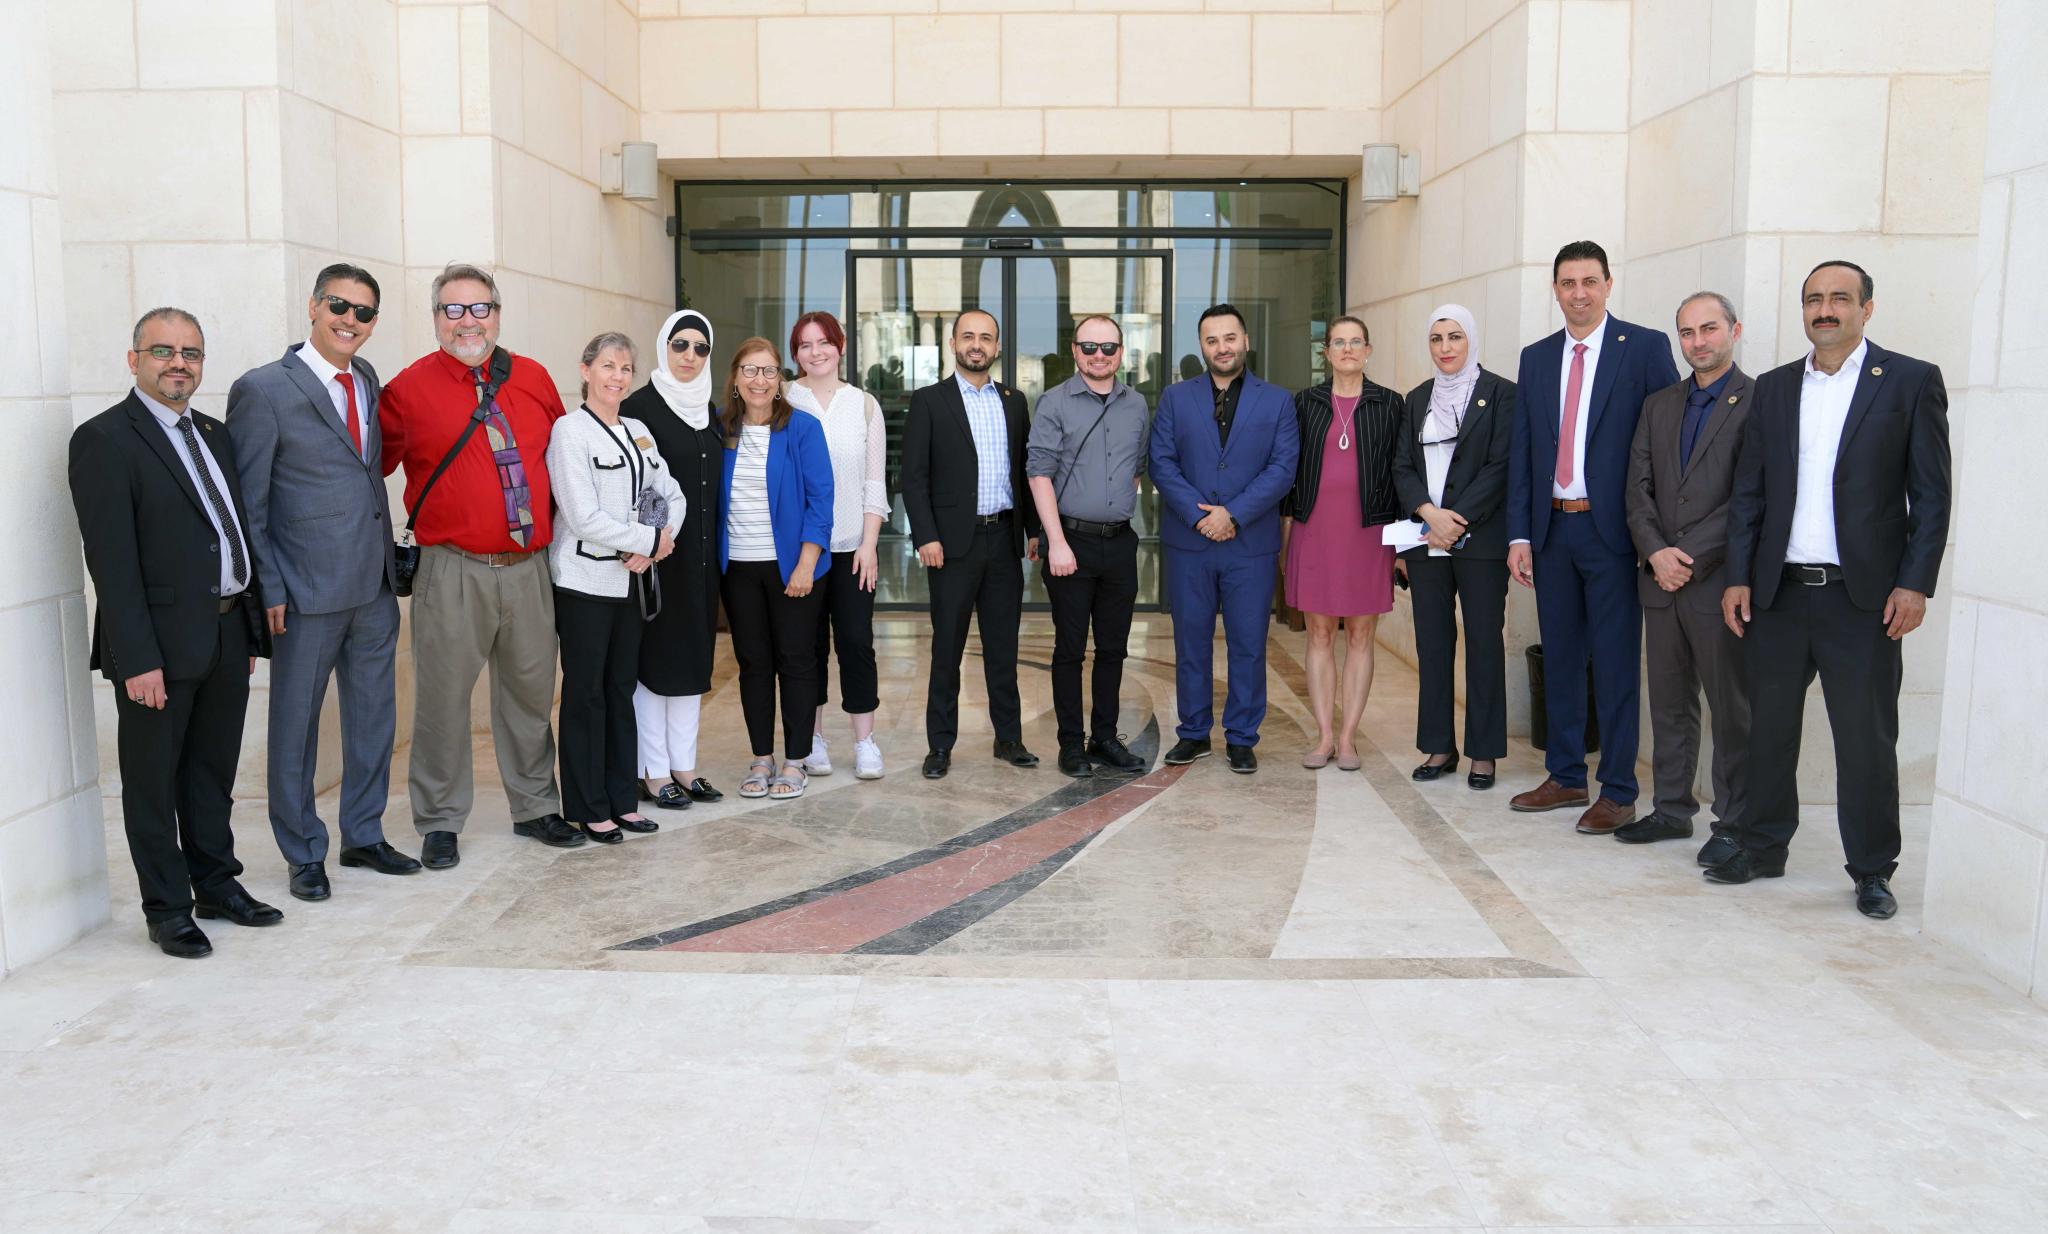 A Visit Aiming to Develop University Education and Scientific Research at AAUP Is Concluded by a Shenandoah University Delegation